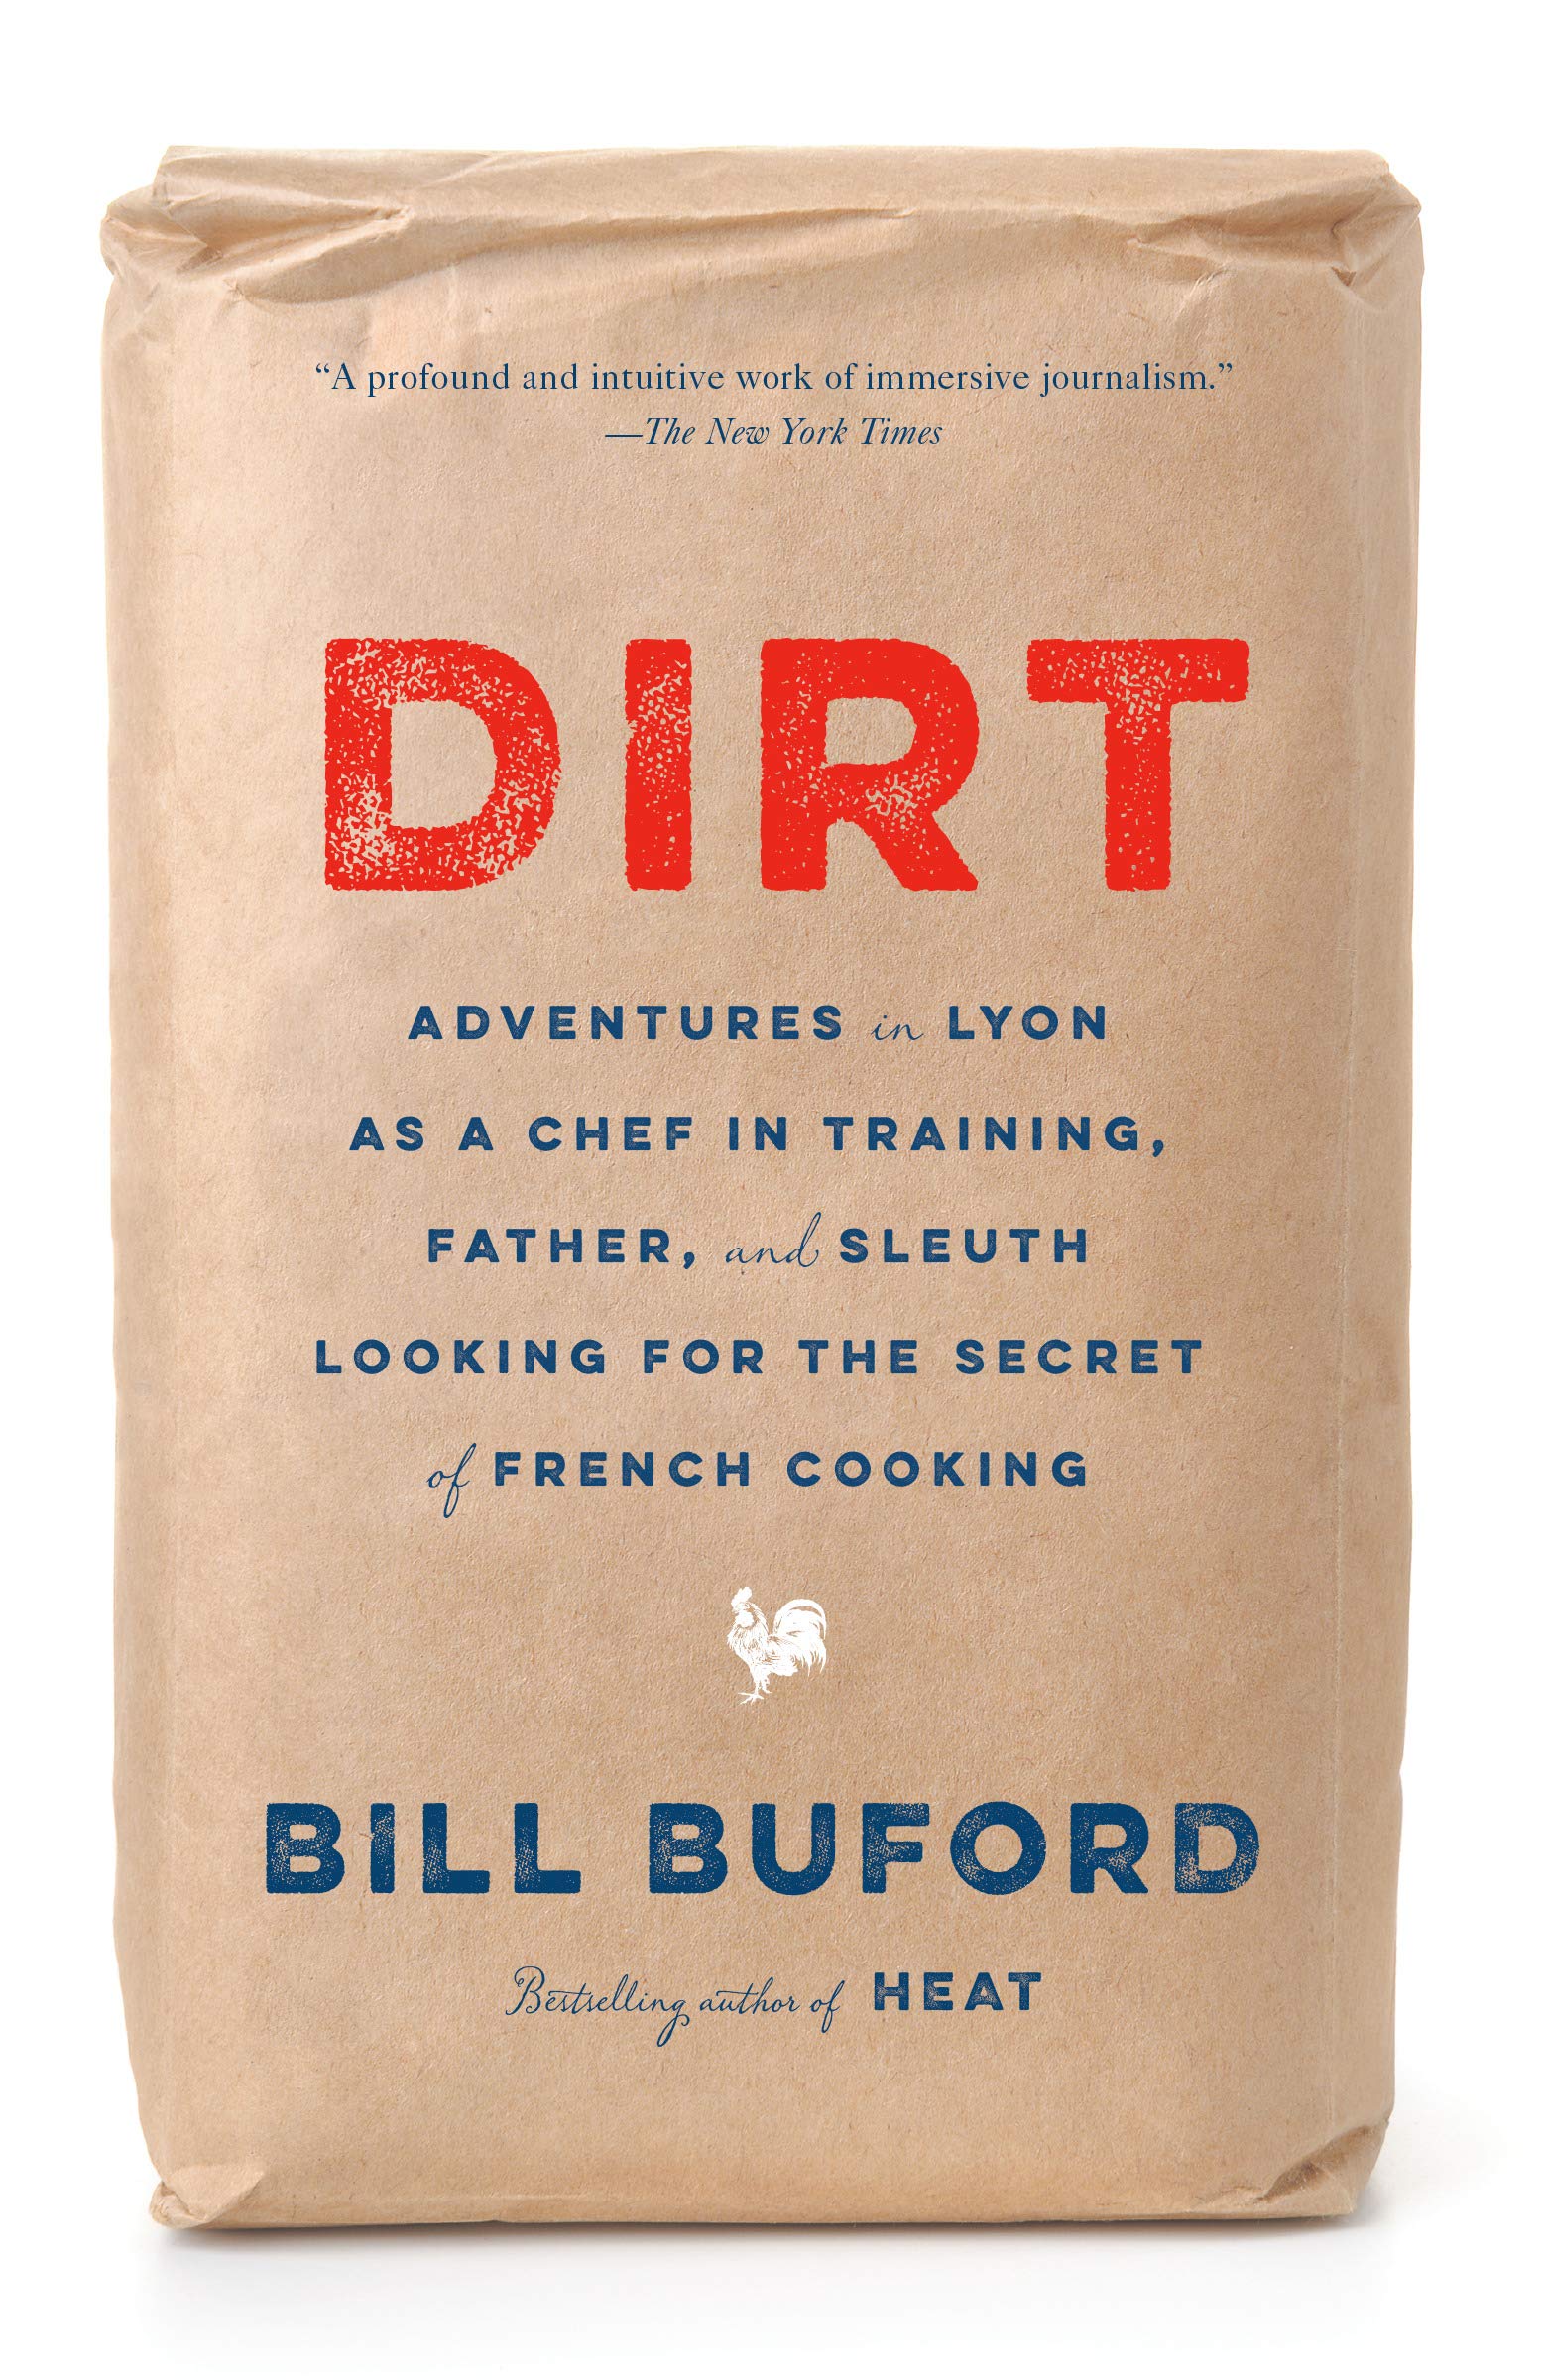 Dirt: Adventures in Lyon as a Chef in Training, Father, and Sleuth Looking for the Secret of French Cooking, paperback edition (Bill Buford)